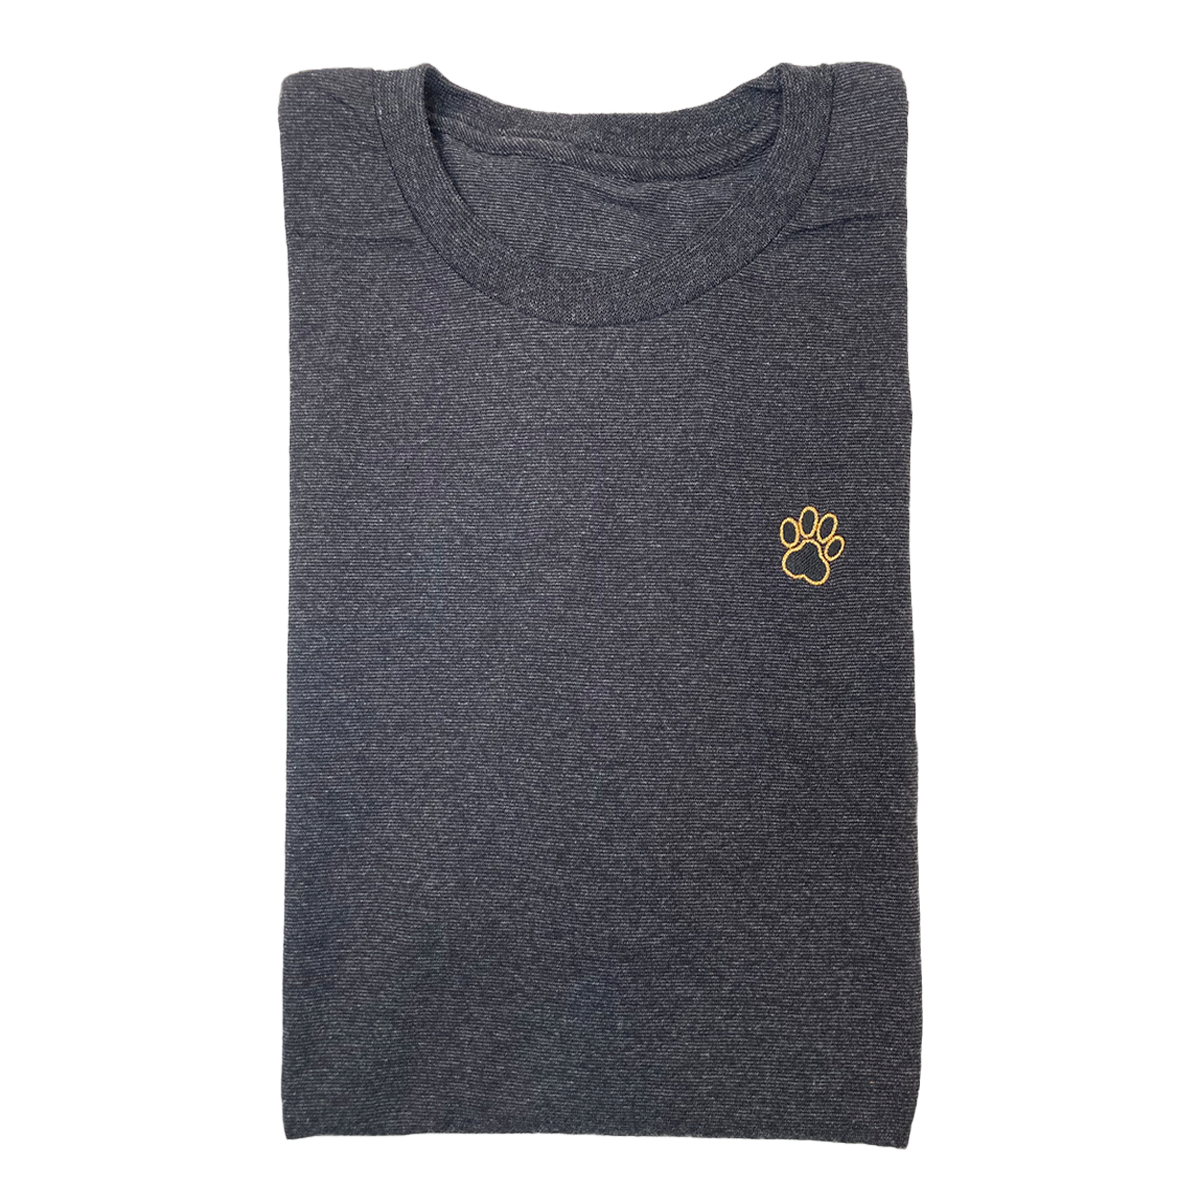 PEPPER // Embroidered Paw T-Shirt // Striped Cotton